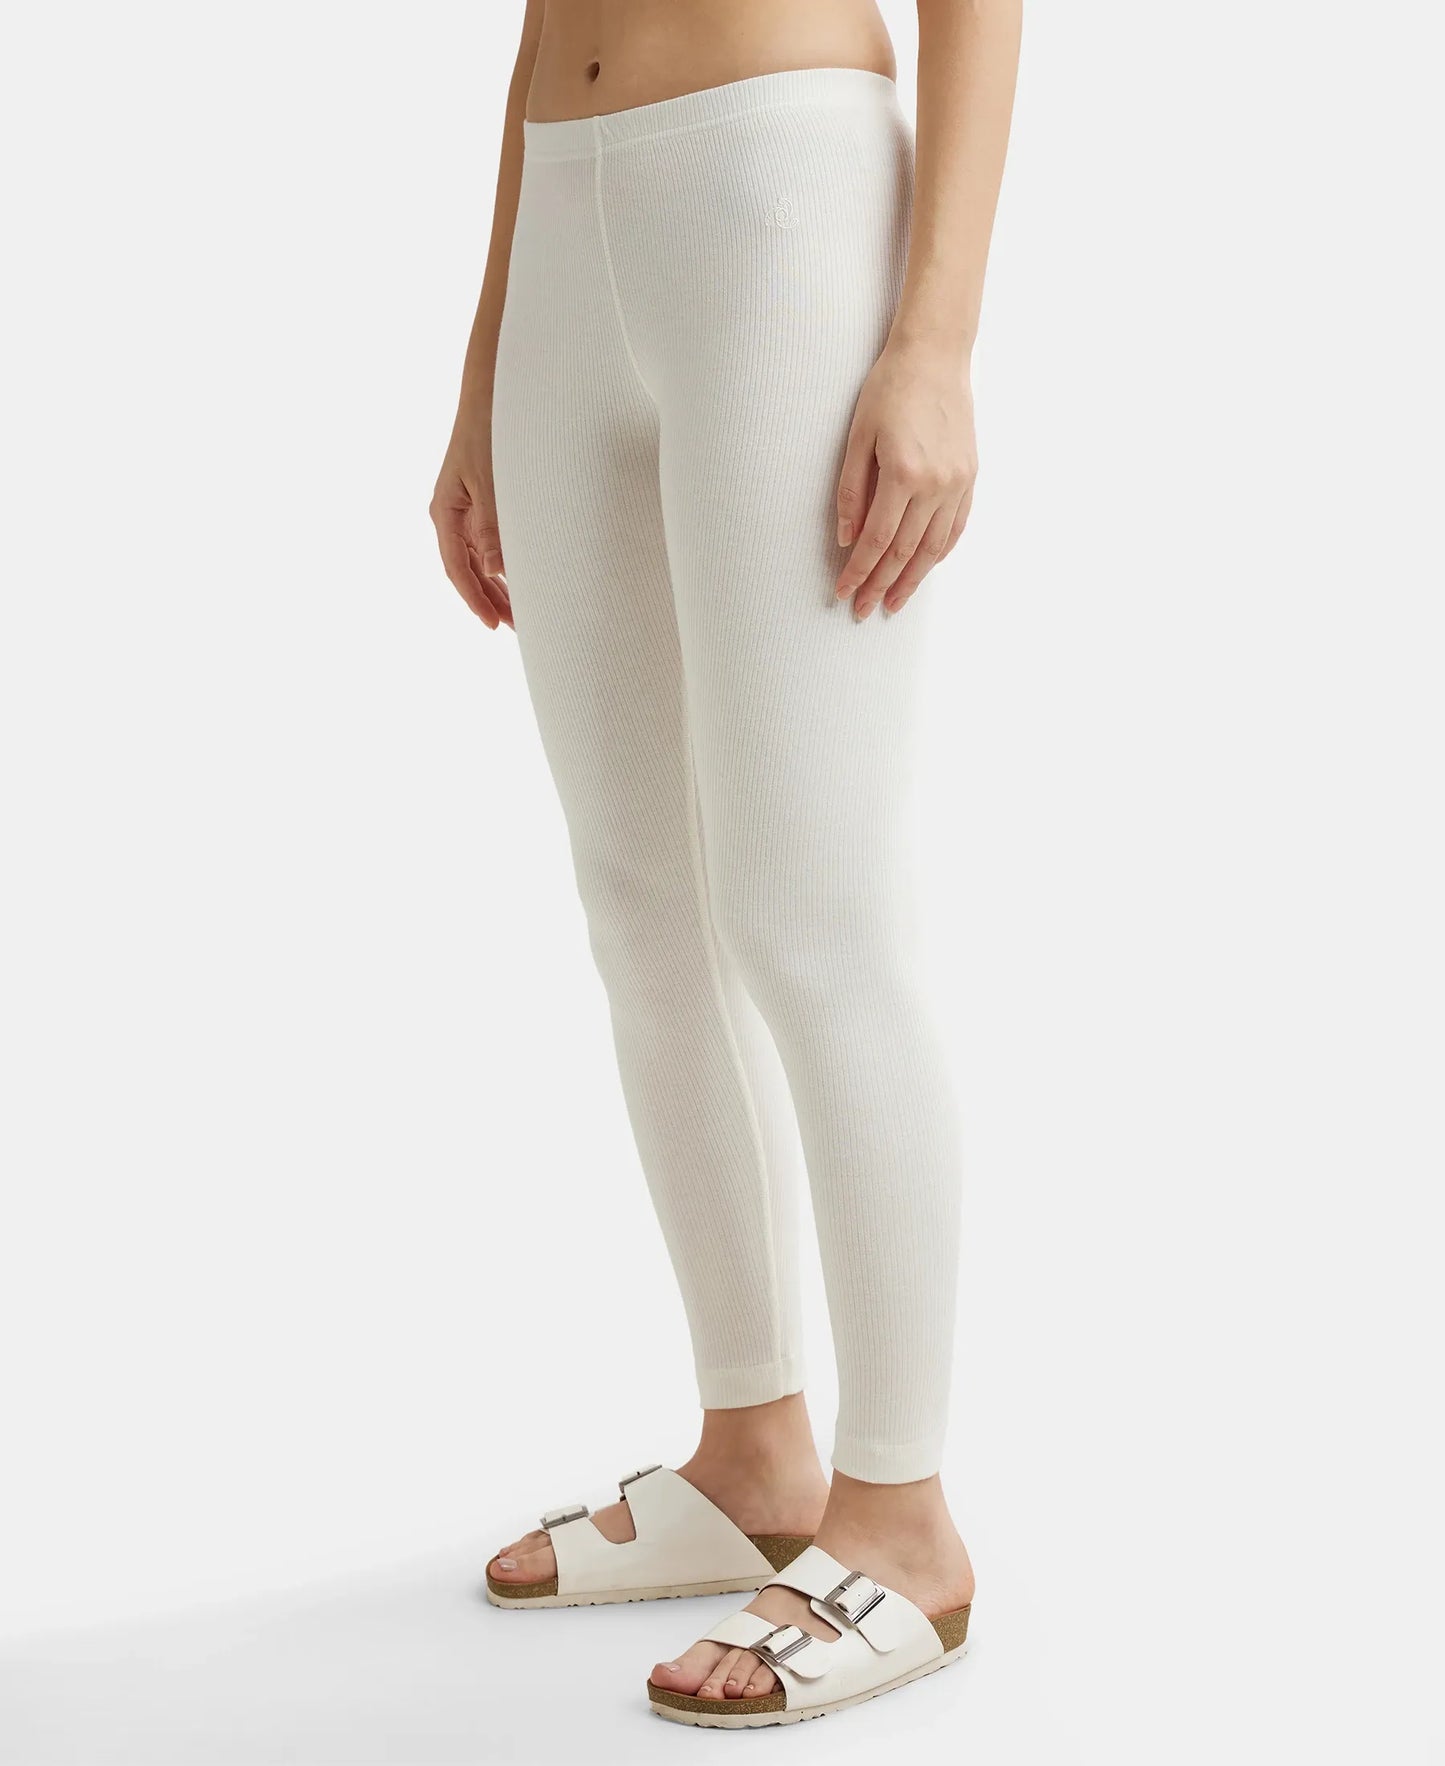 Super Combed Cotton Rich Thermal Leggings with StayWarm Technology - Off White-2